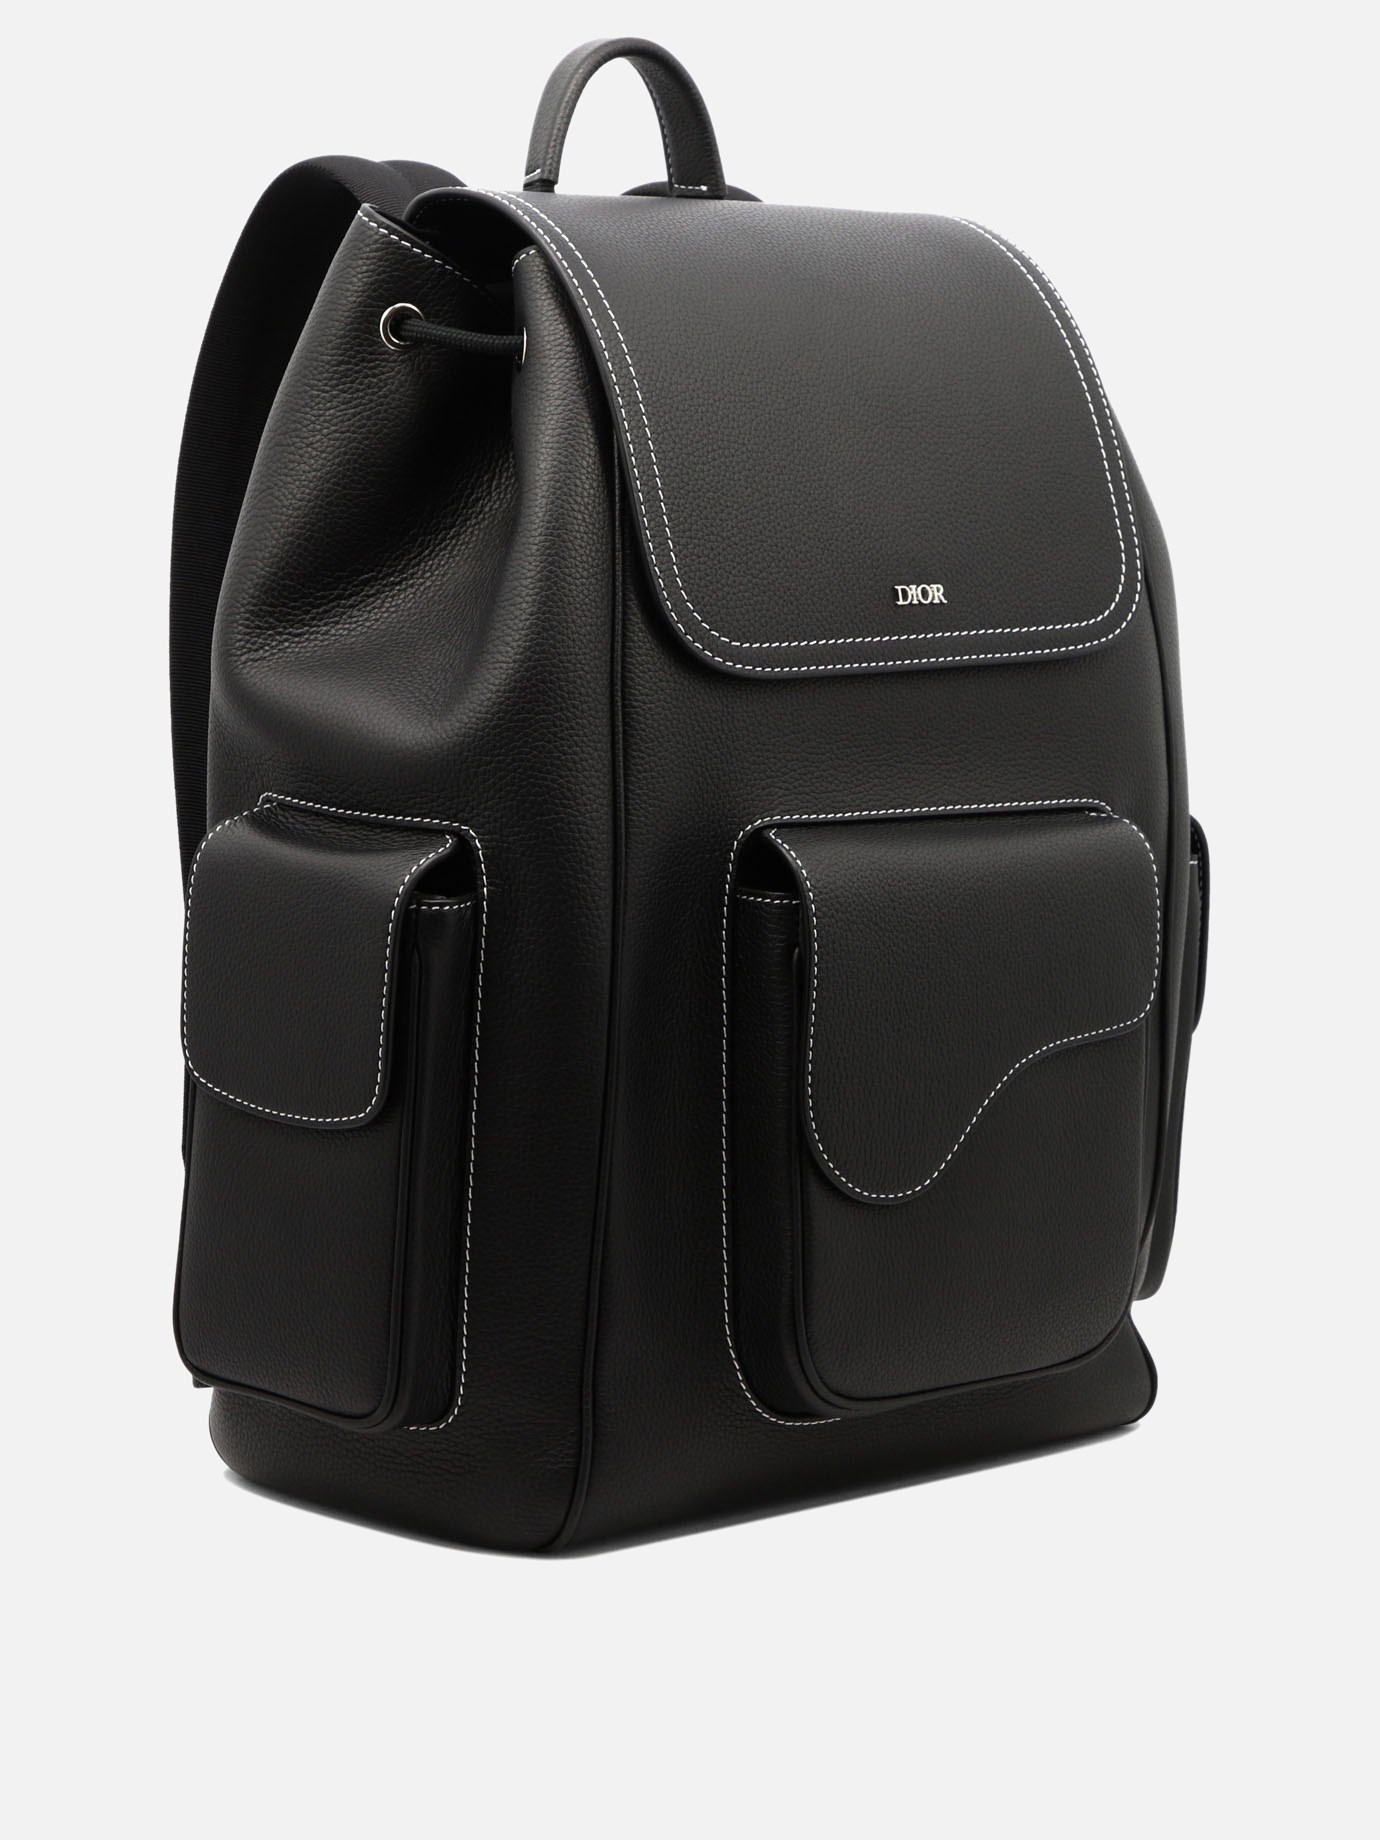  Saddle  backpack by Dior